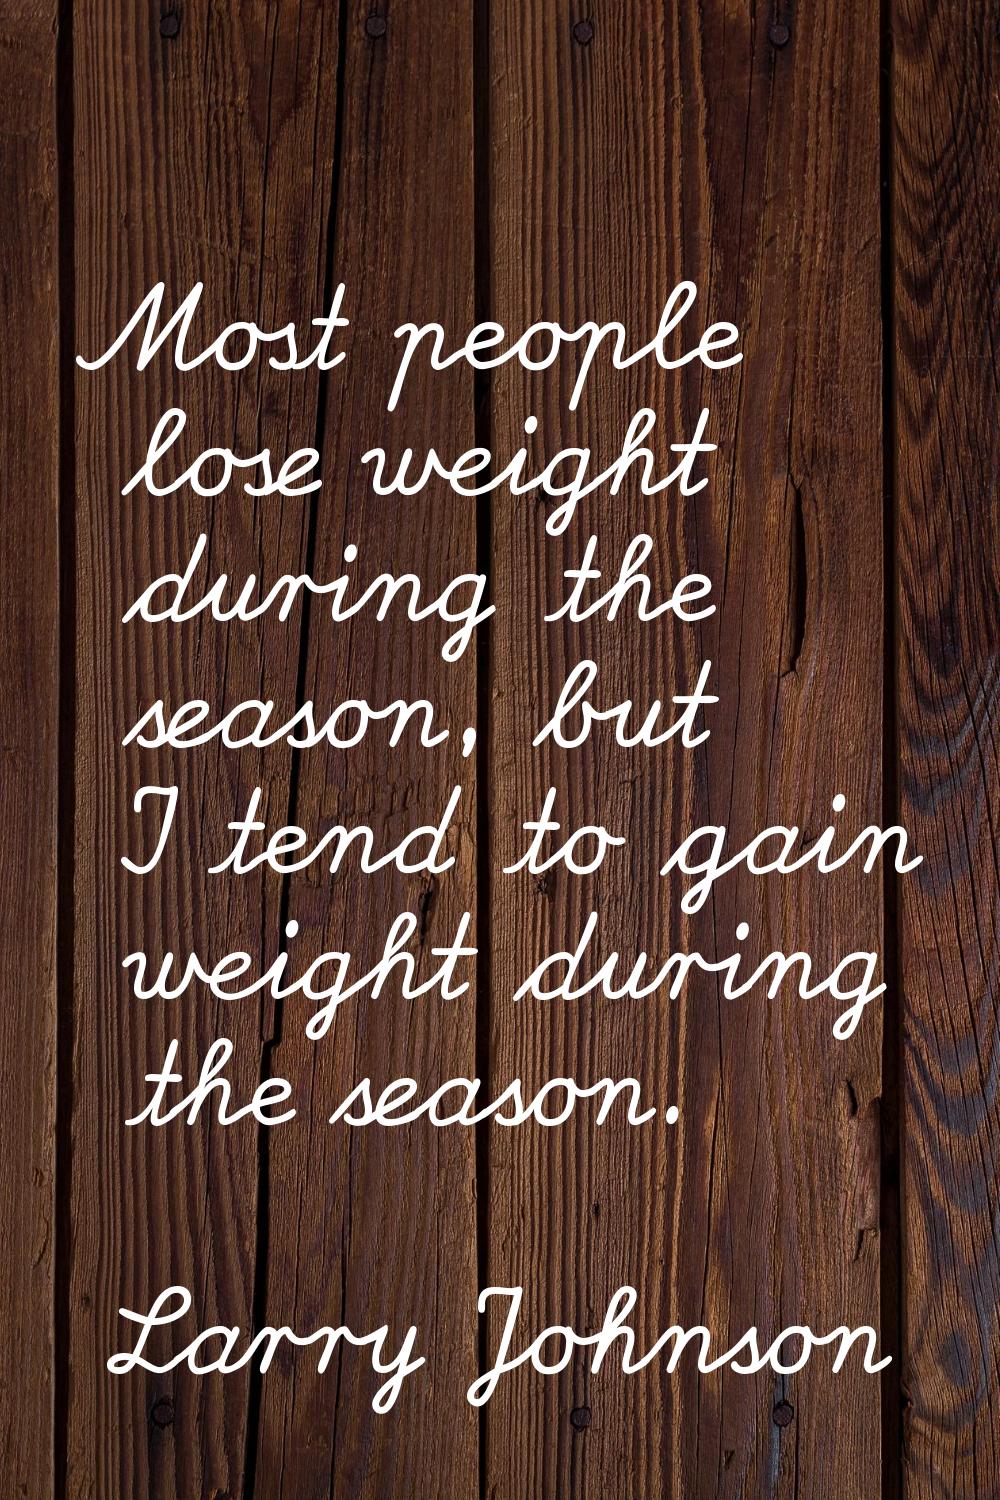 Most people lose weight during the season, but I tend to gain weight during the season.